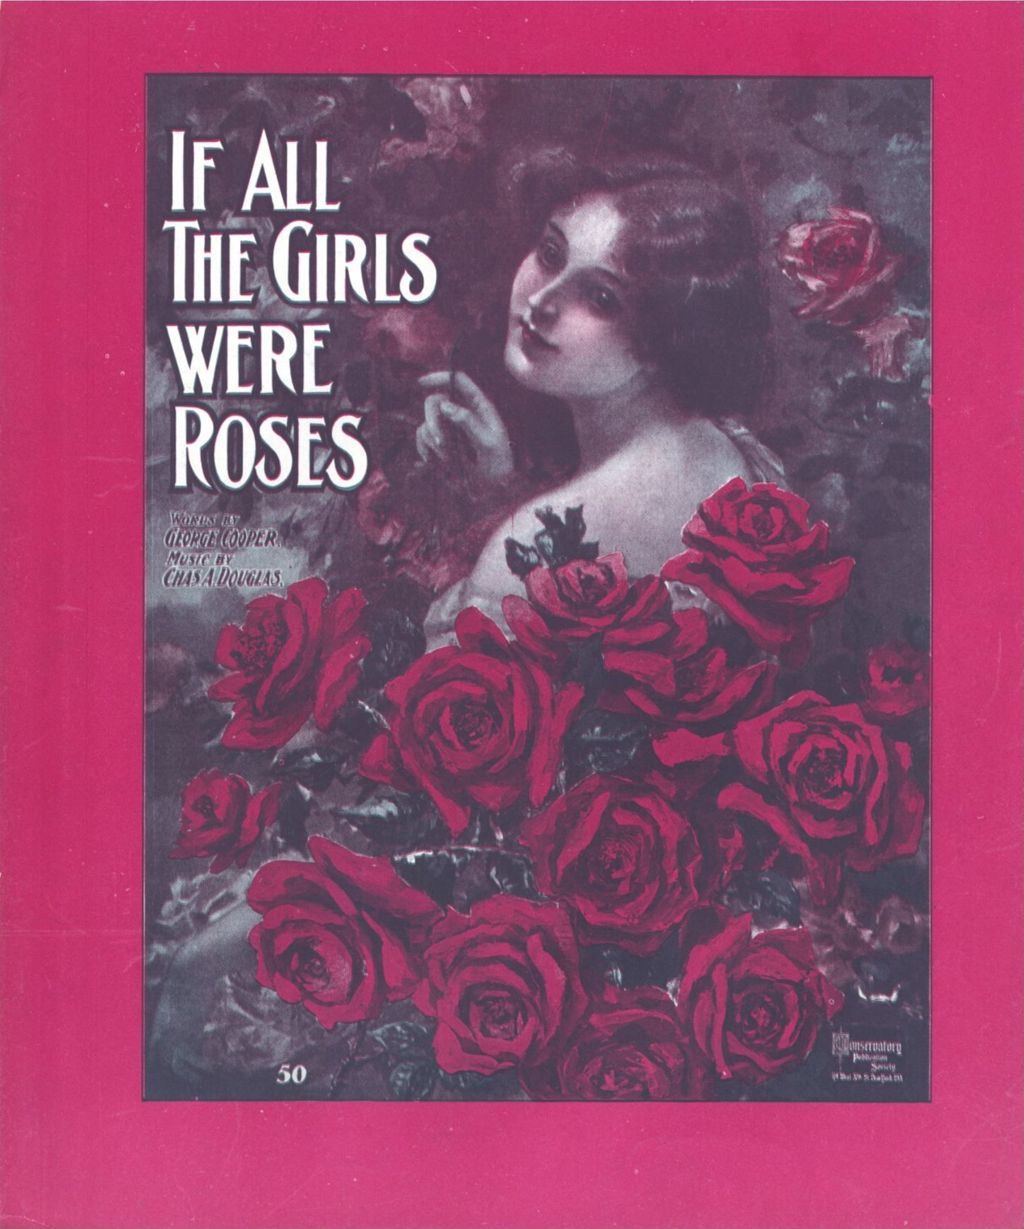 If All the Girls Were Roses